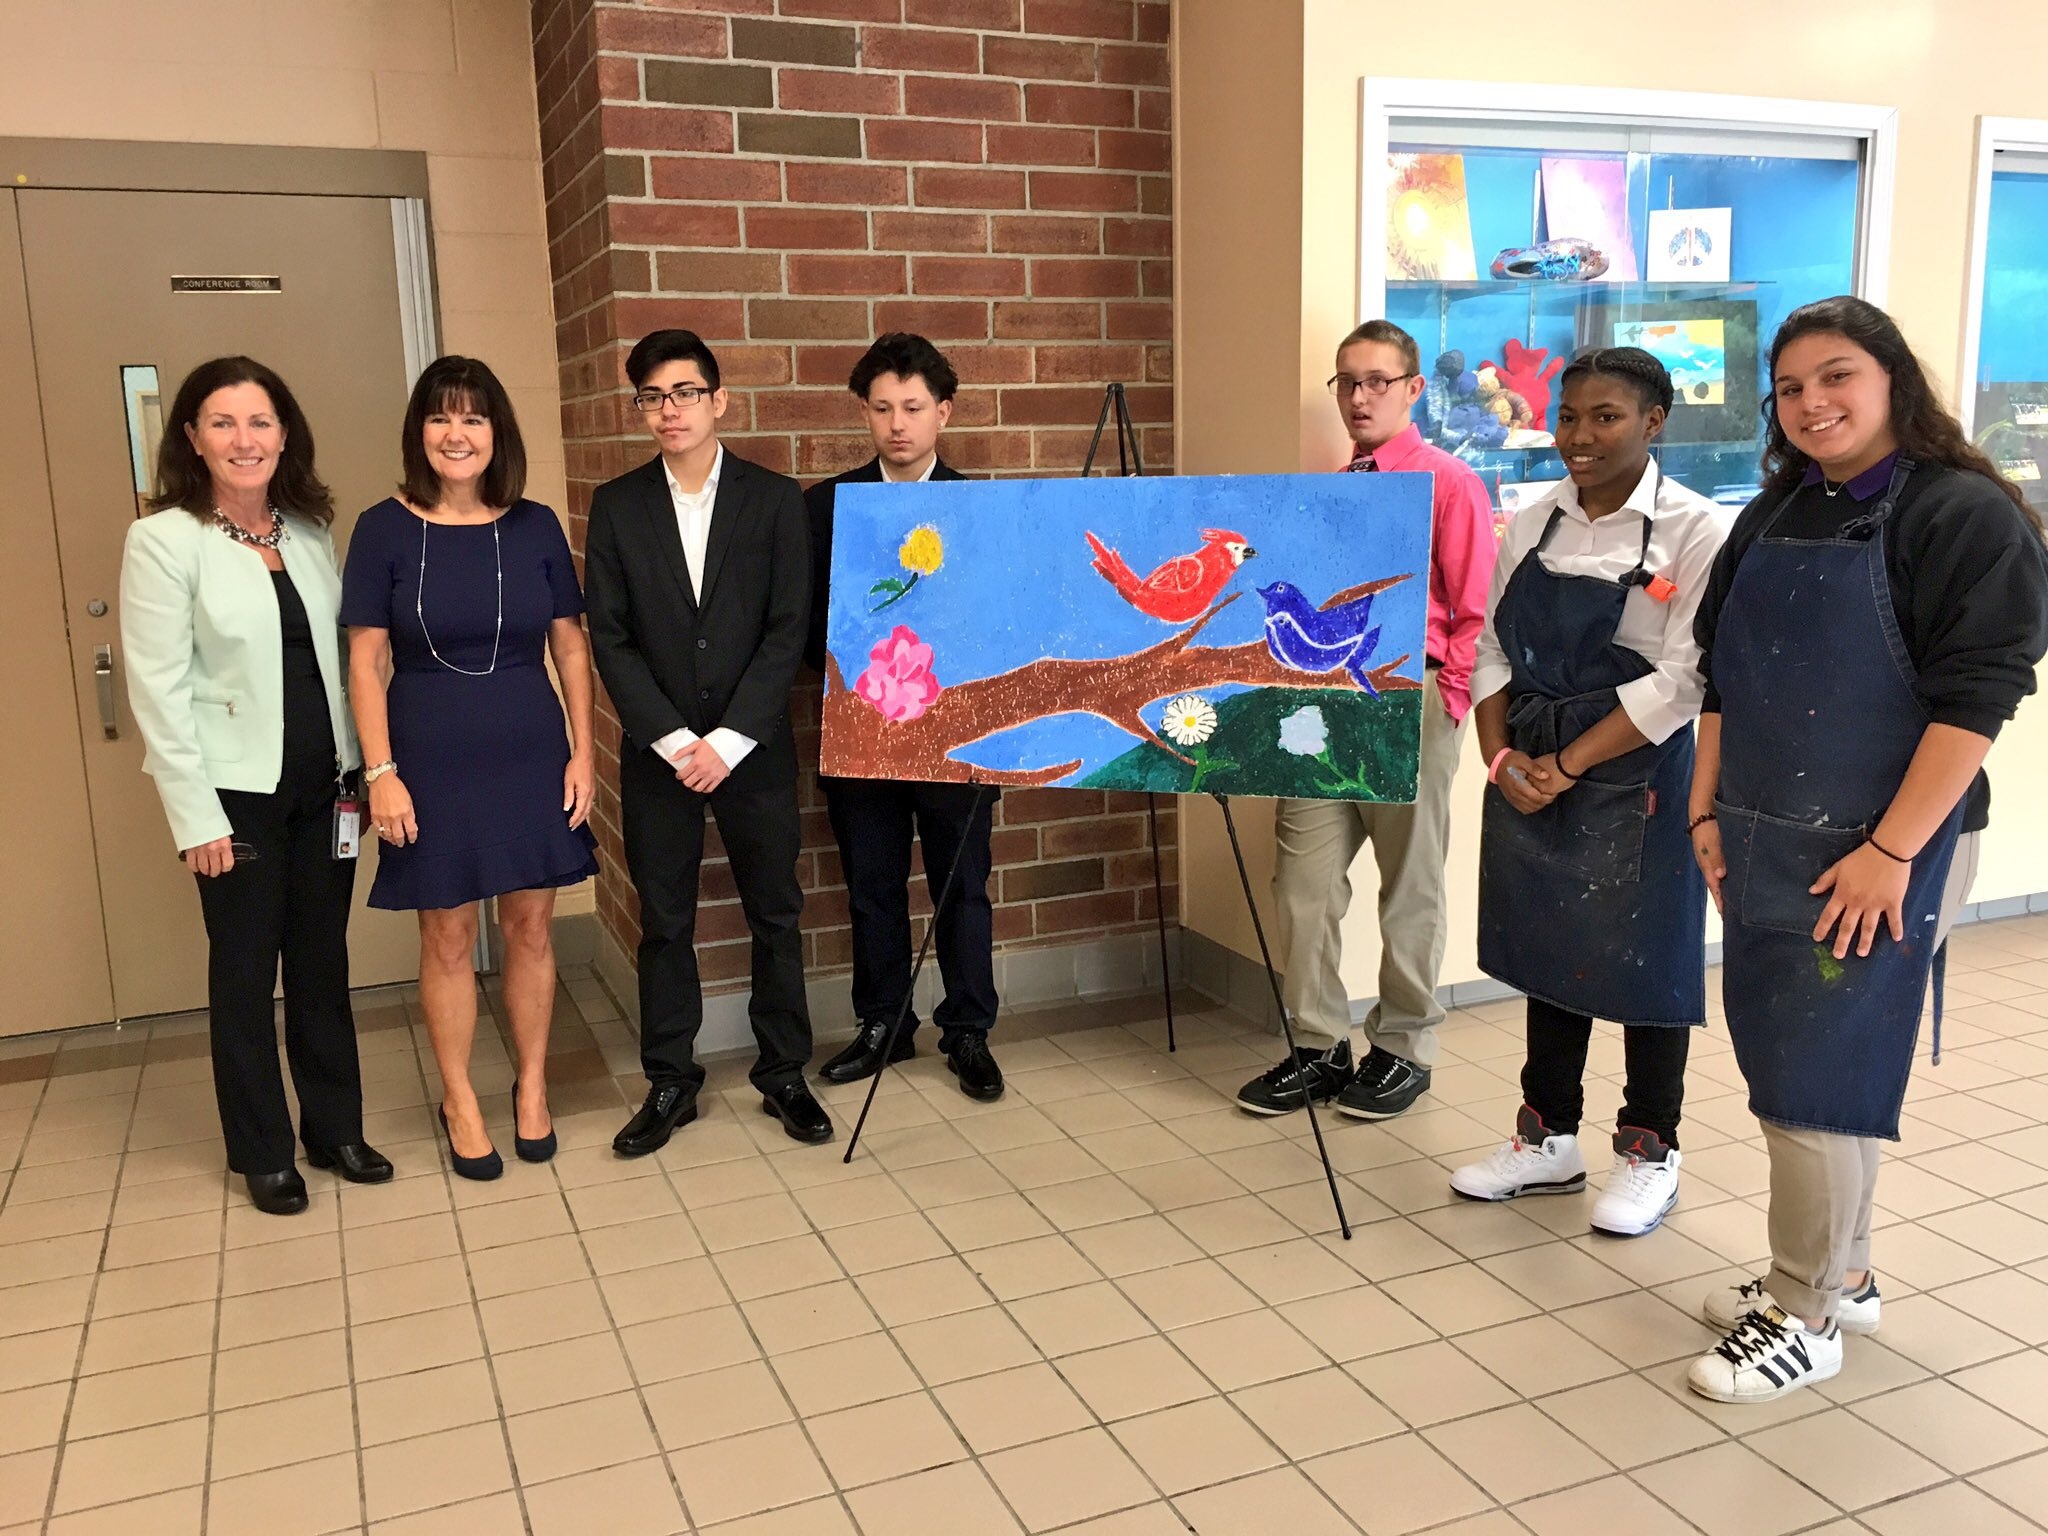 Second Lady Karen Pence's Visit to MercyFirst in New York